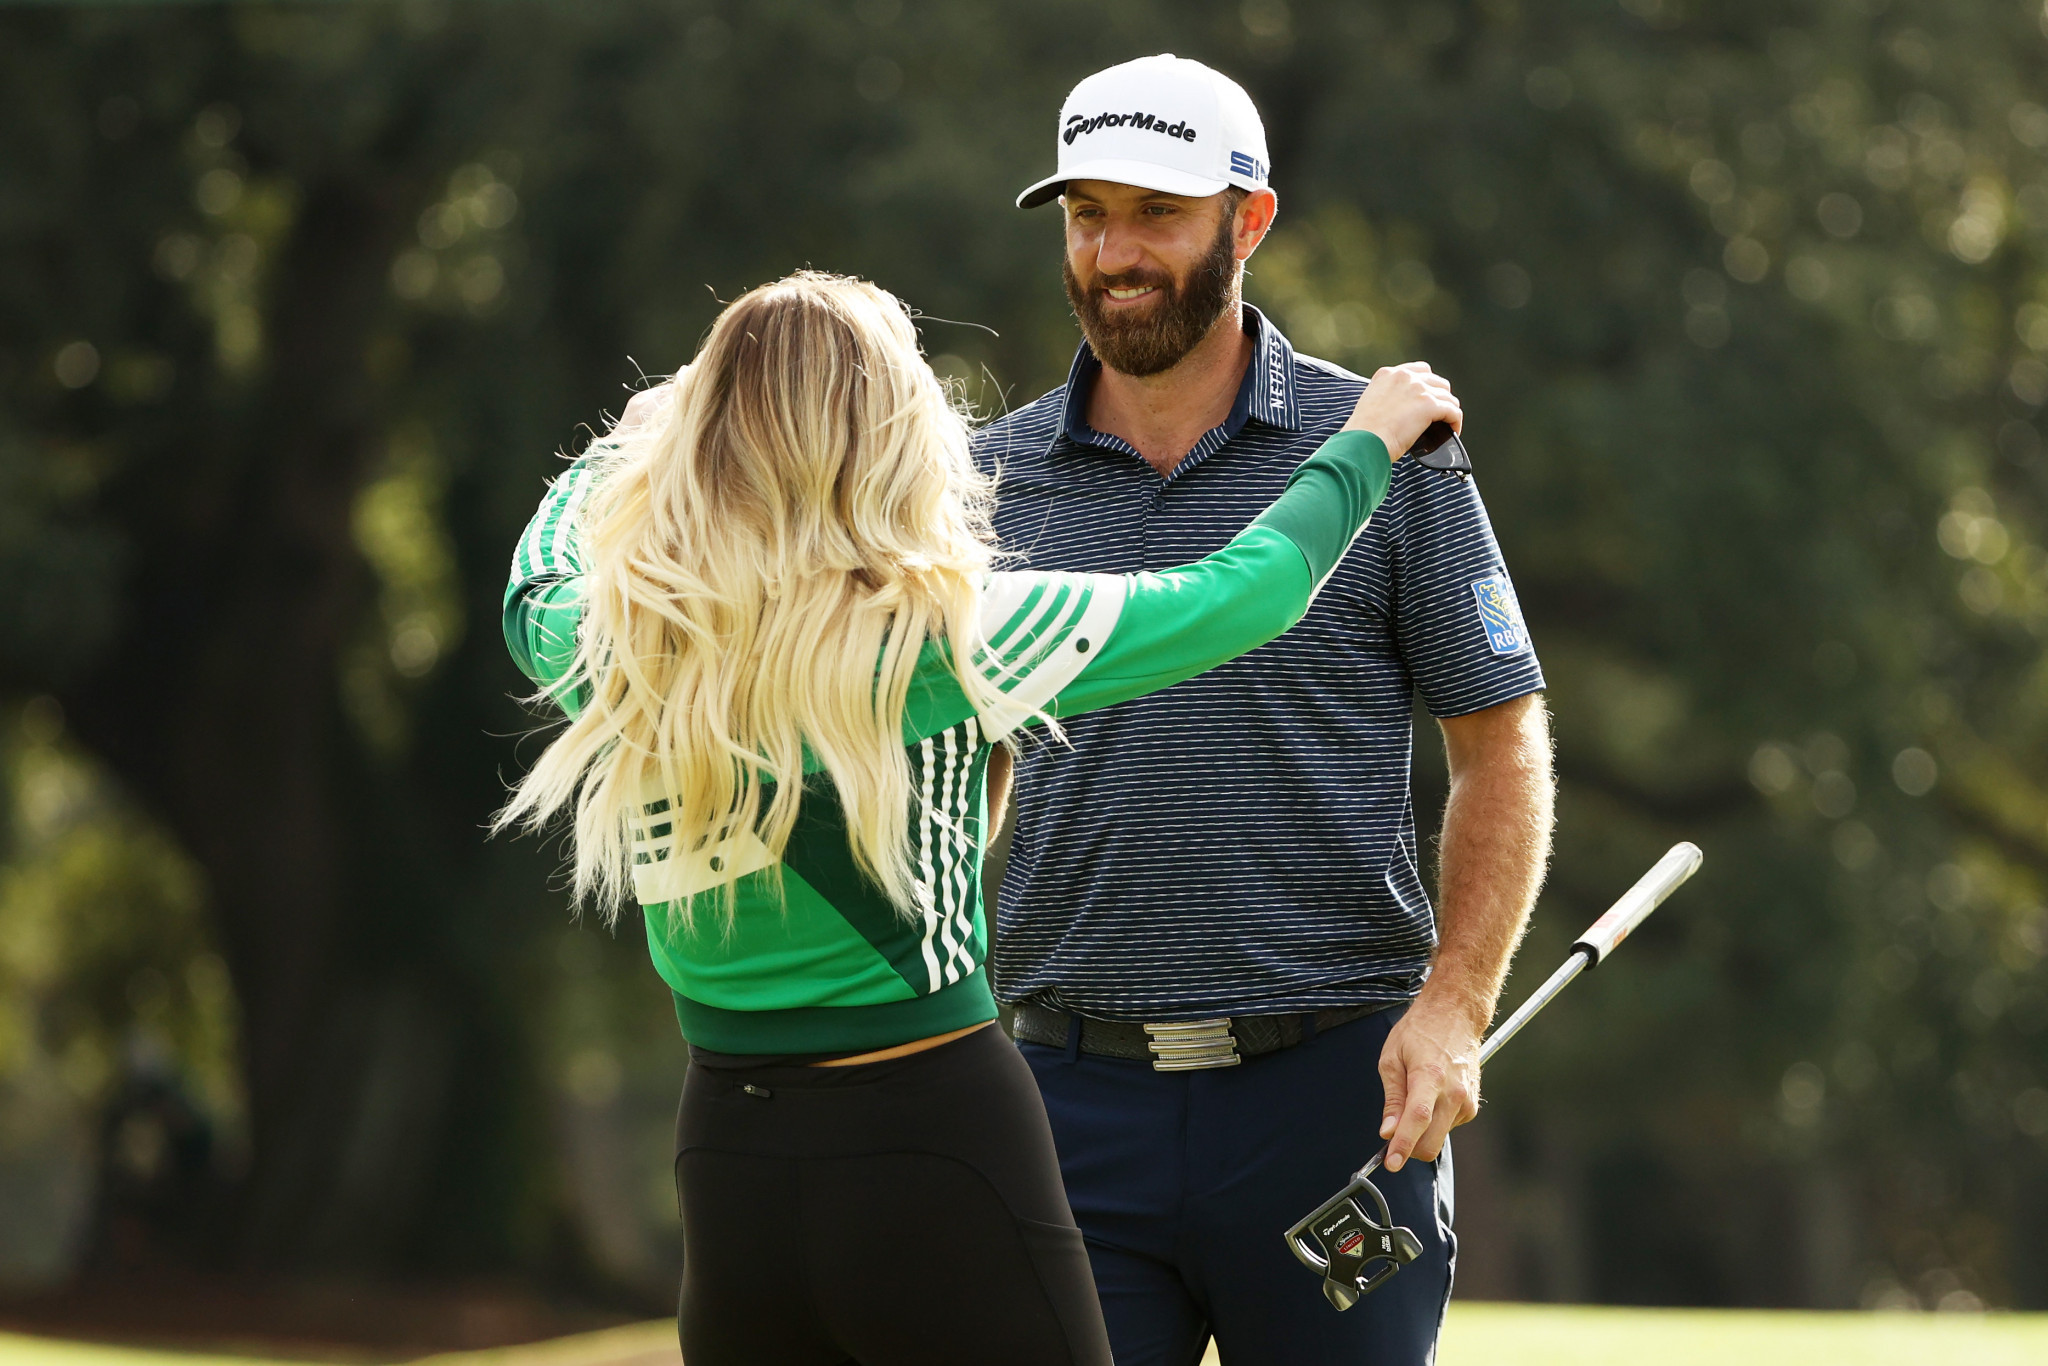 Johnson celebrates his Masters triumph on the 18th green with fiancee Paulina Gretzky ©Getty Images